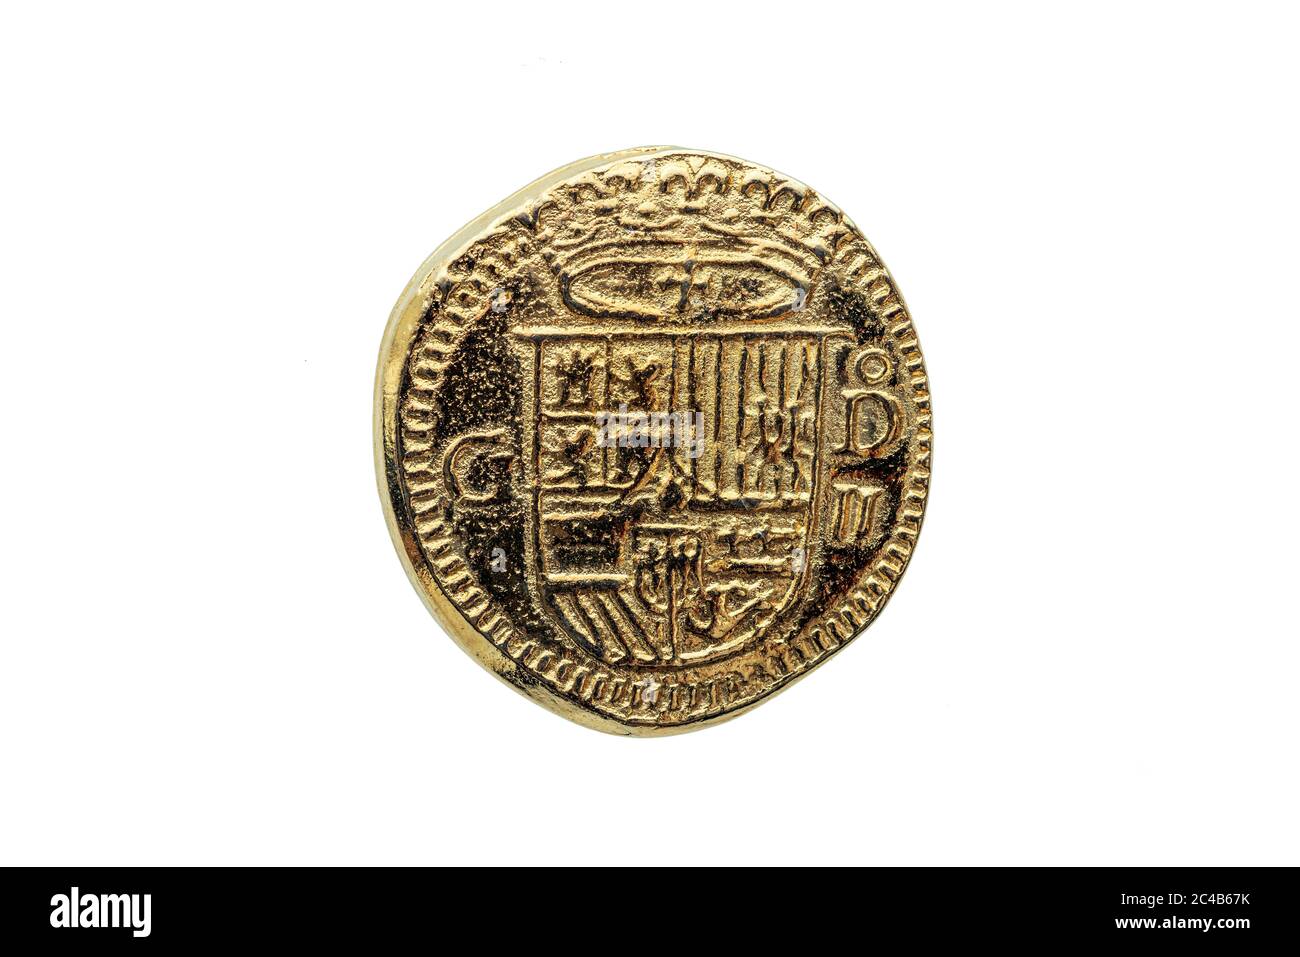 Gold Escudos Coin of Philip II (Felipe II) of Spain Crowned Shield Obverse cut out and isolated on a white background Stock Photo